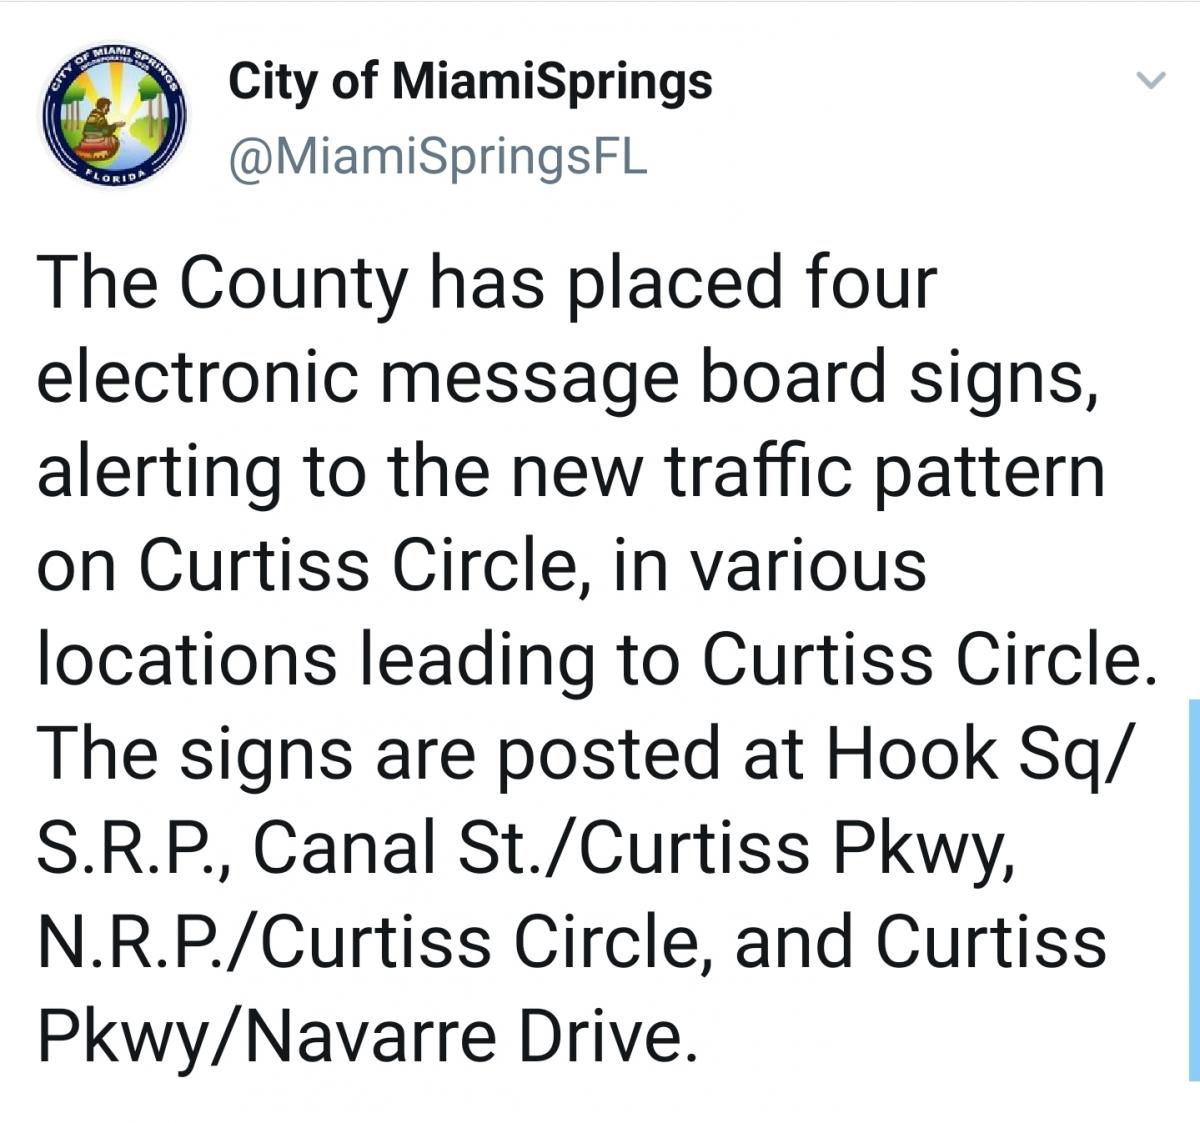 The County Has Placed Four Electronic Message Board Signs, Alerting to the New Traffic Pattern on Curtiss Circle